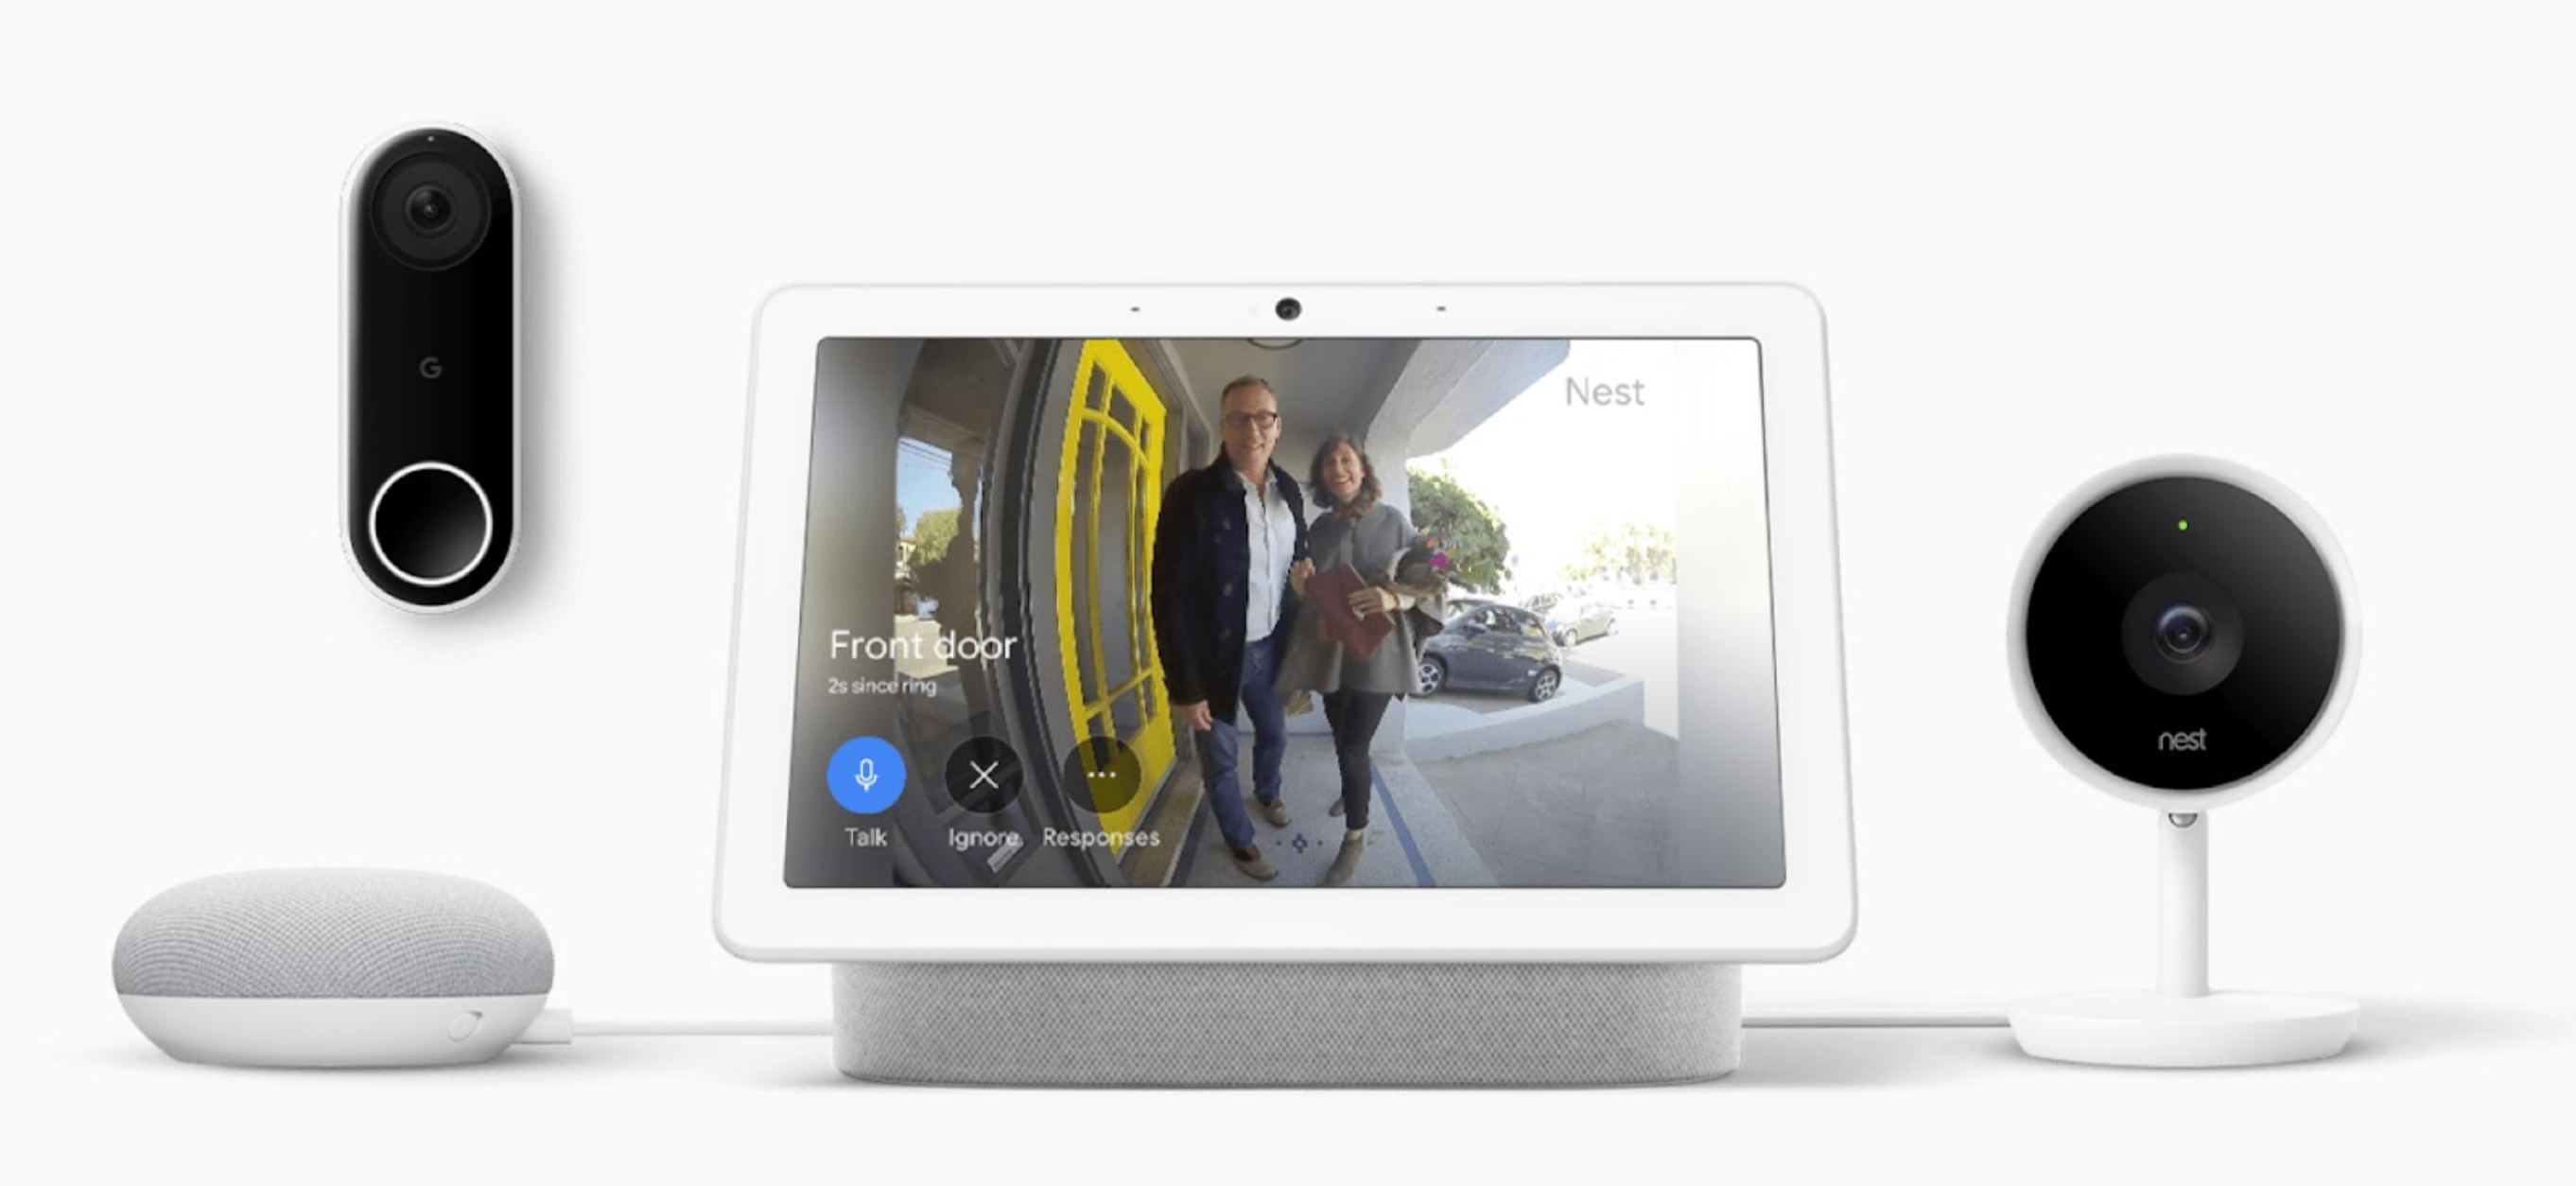 Google Nest smart home products